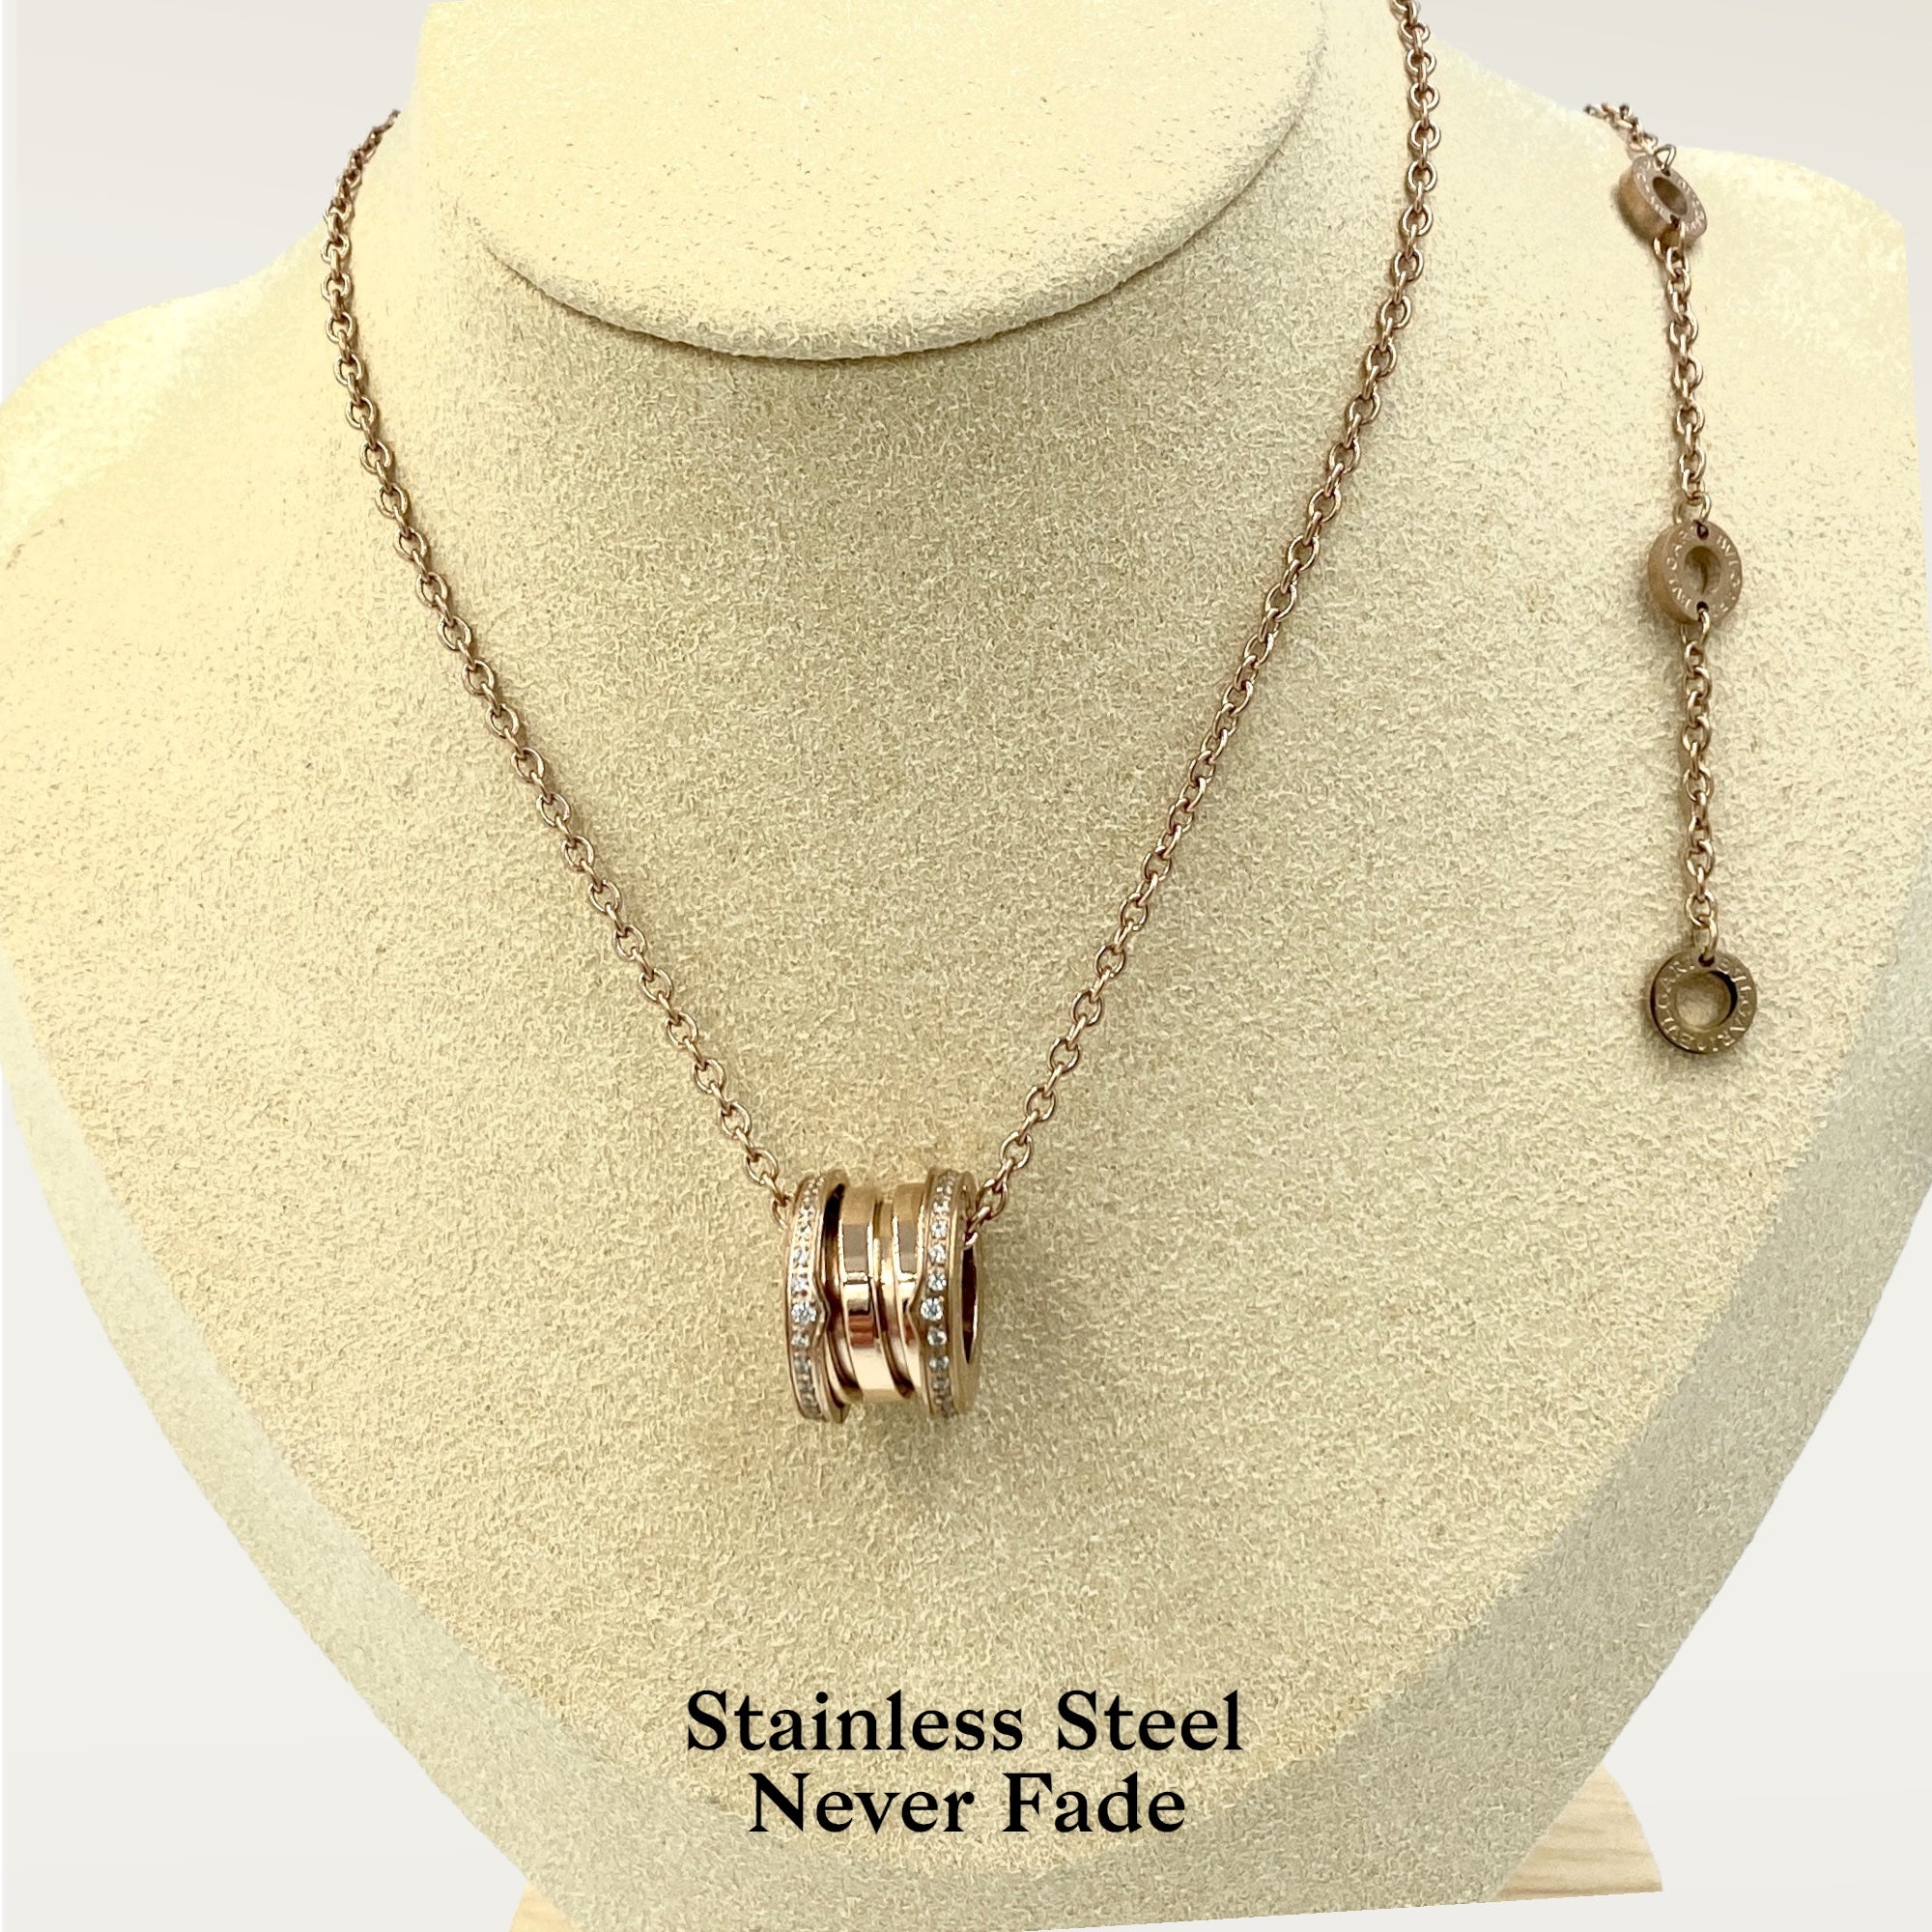 Stainless Steel 316L Yellow Gold Rose Gold Chain Necklace